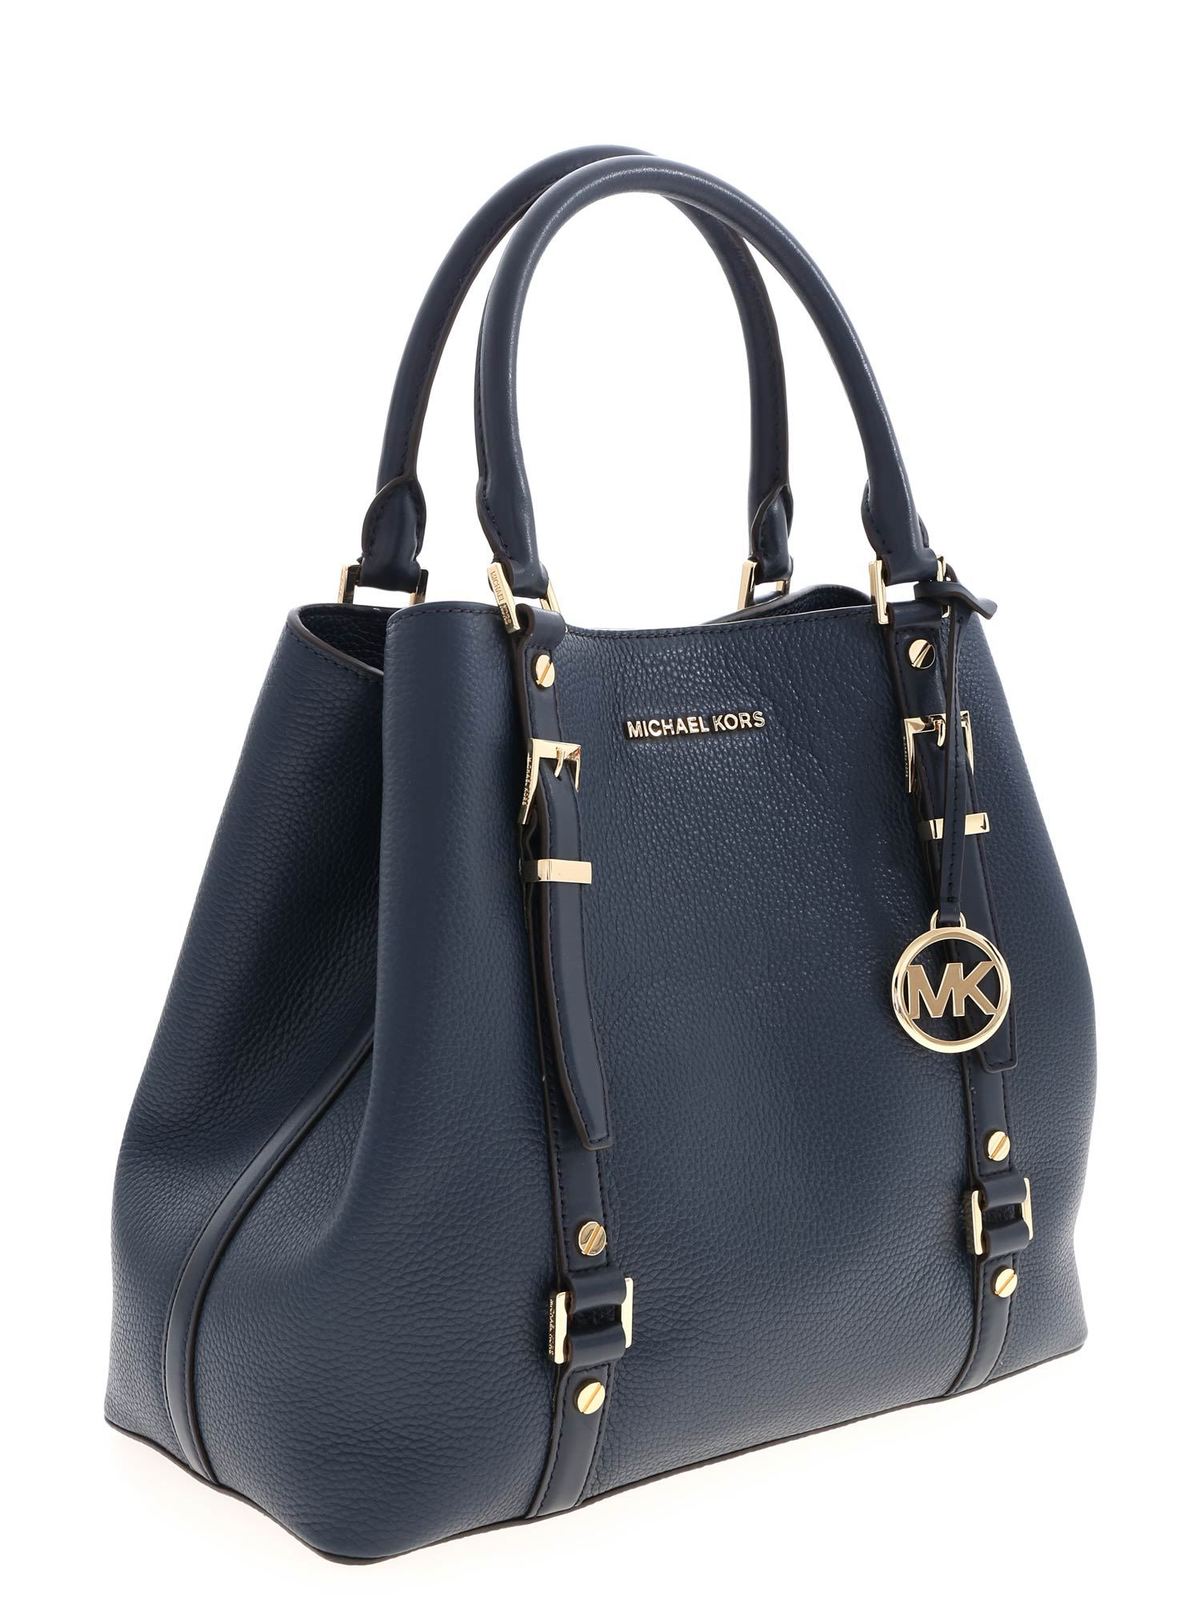 Totes bags Michael Kors - Voyager medium leather tote - 30H7SV6T8L426